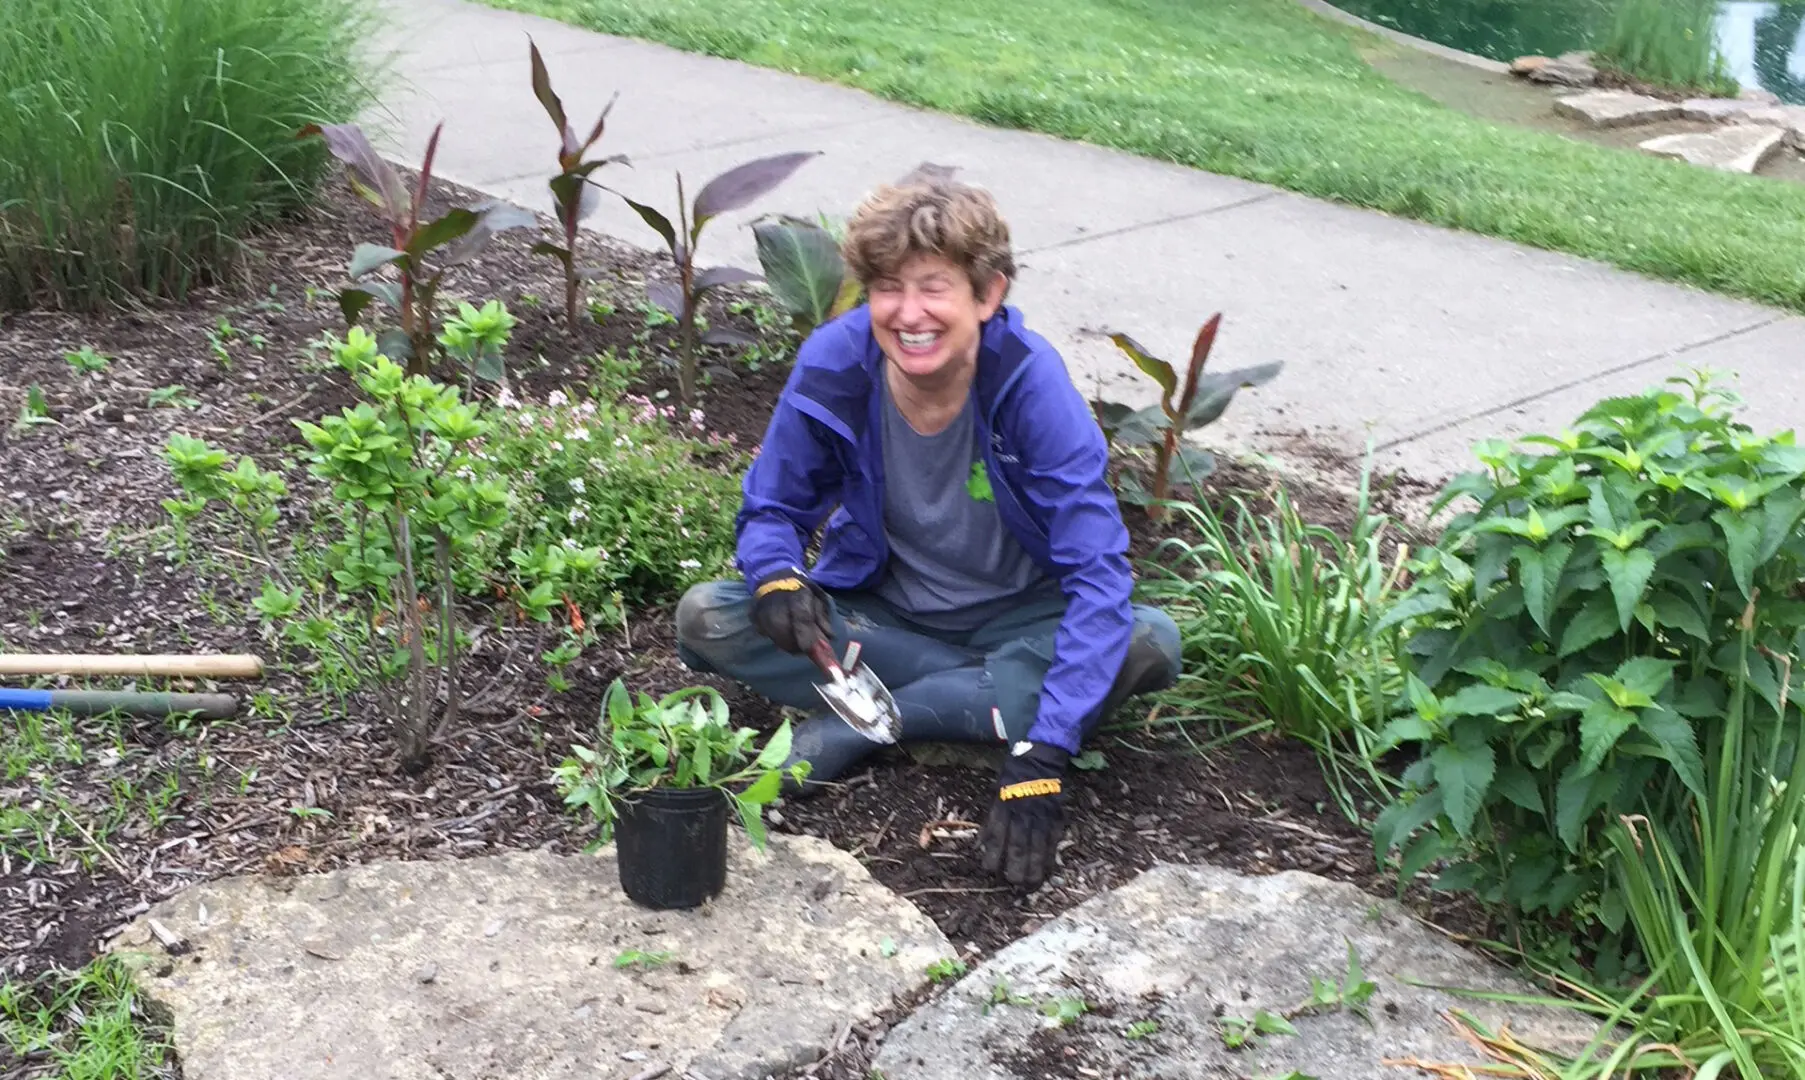 Cathy Caldemeyer landscaping with Cincinnati Parks Foundation